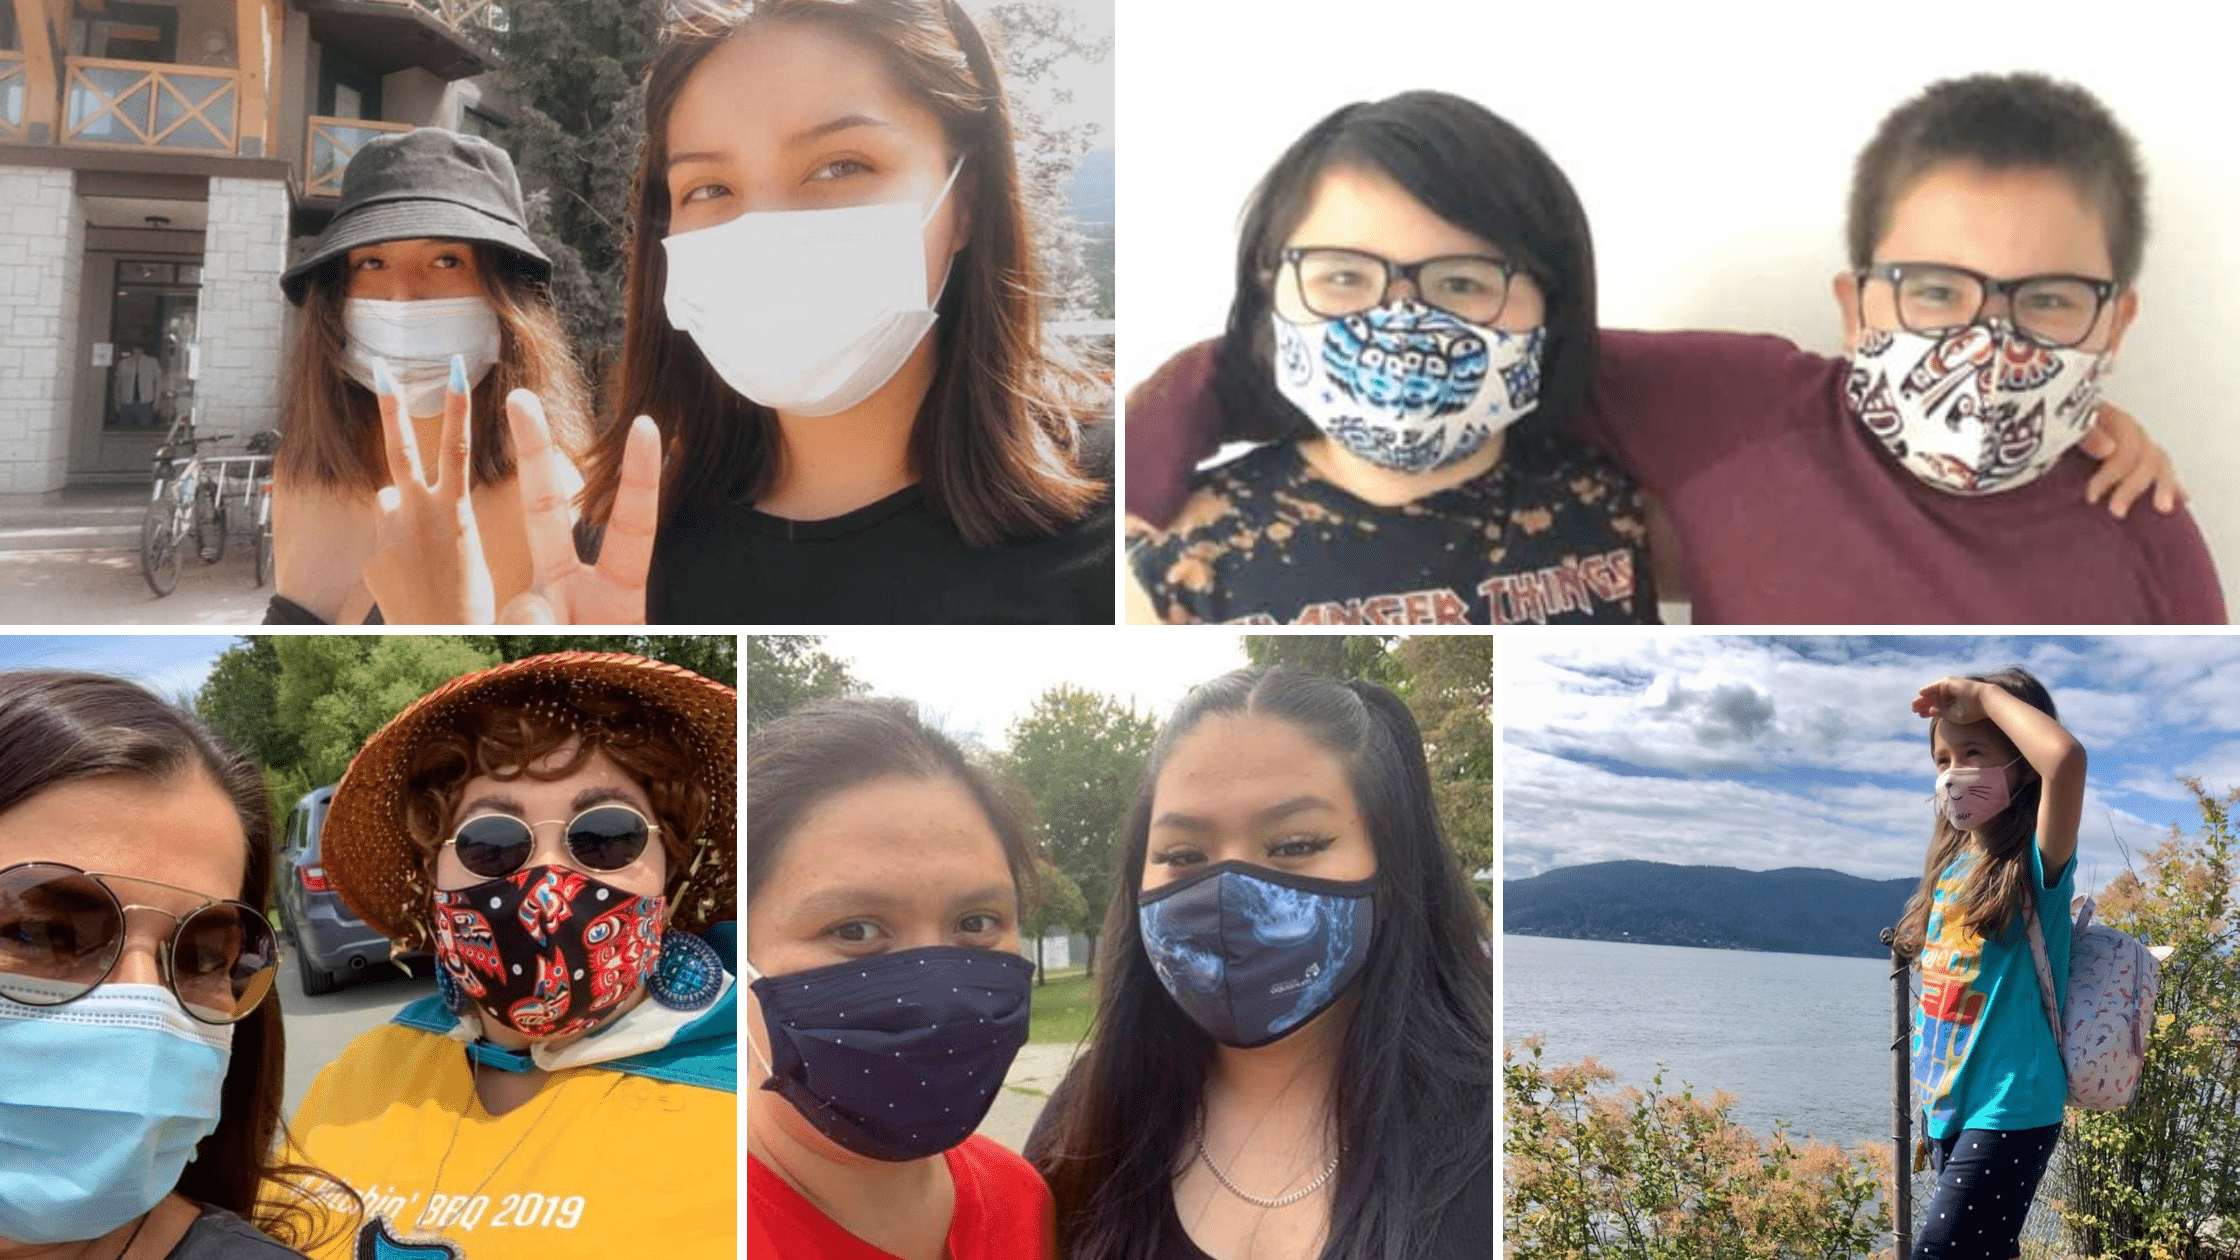 Photos of Musqueam people in face masks